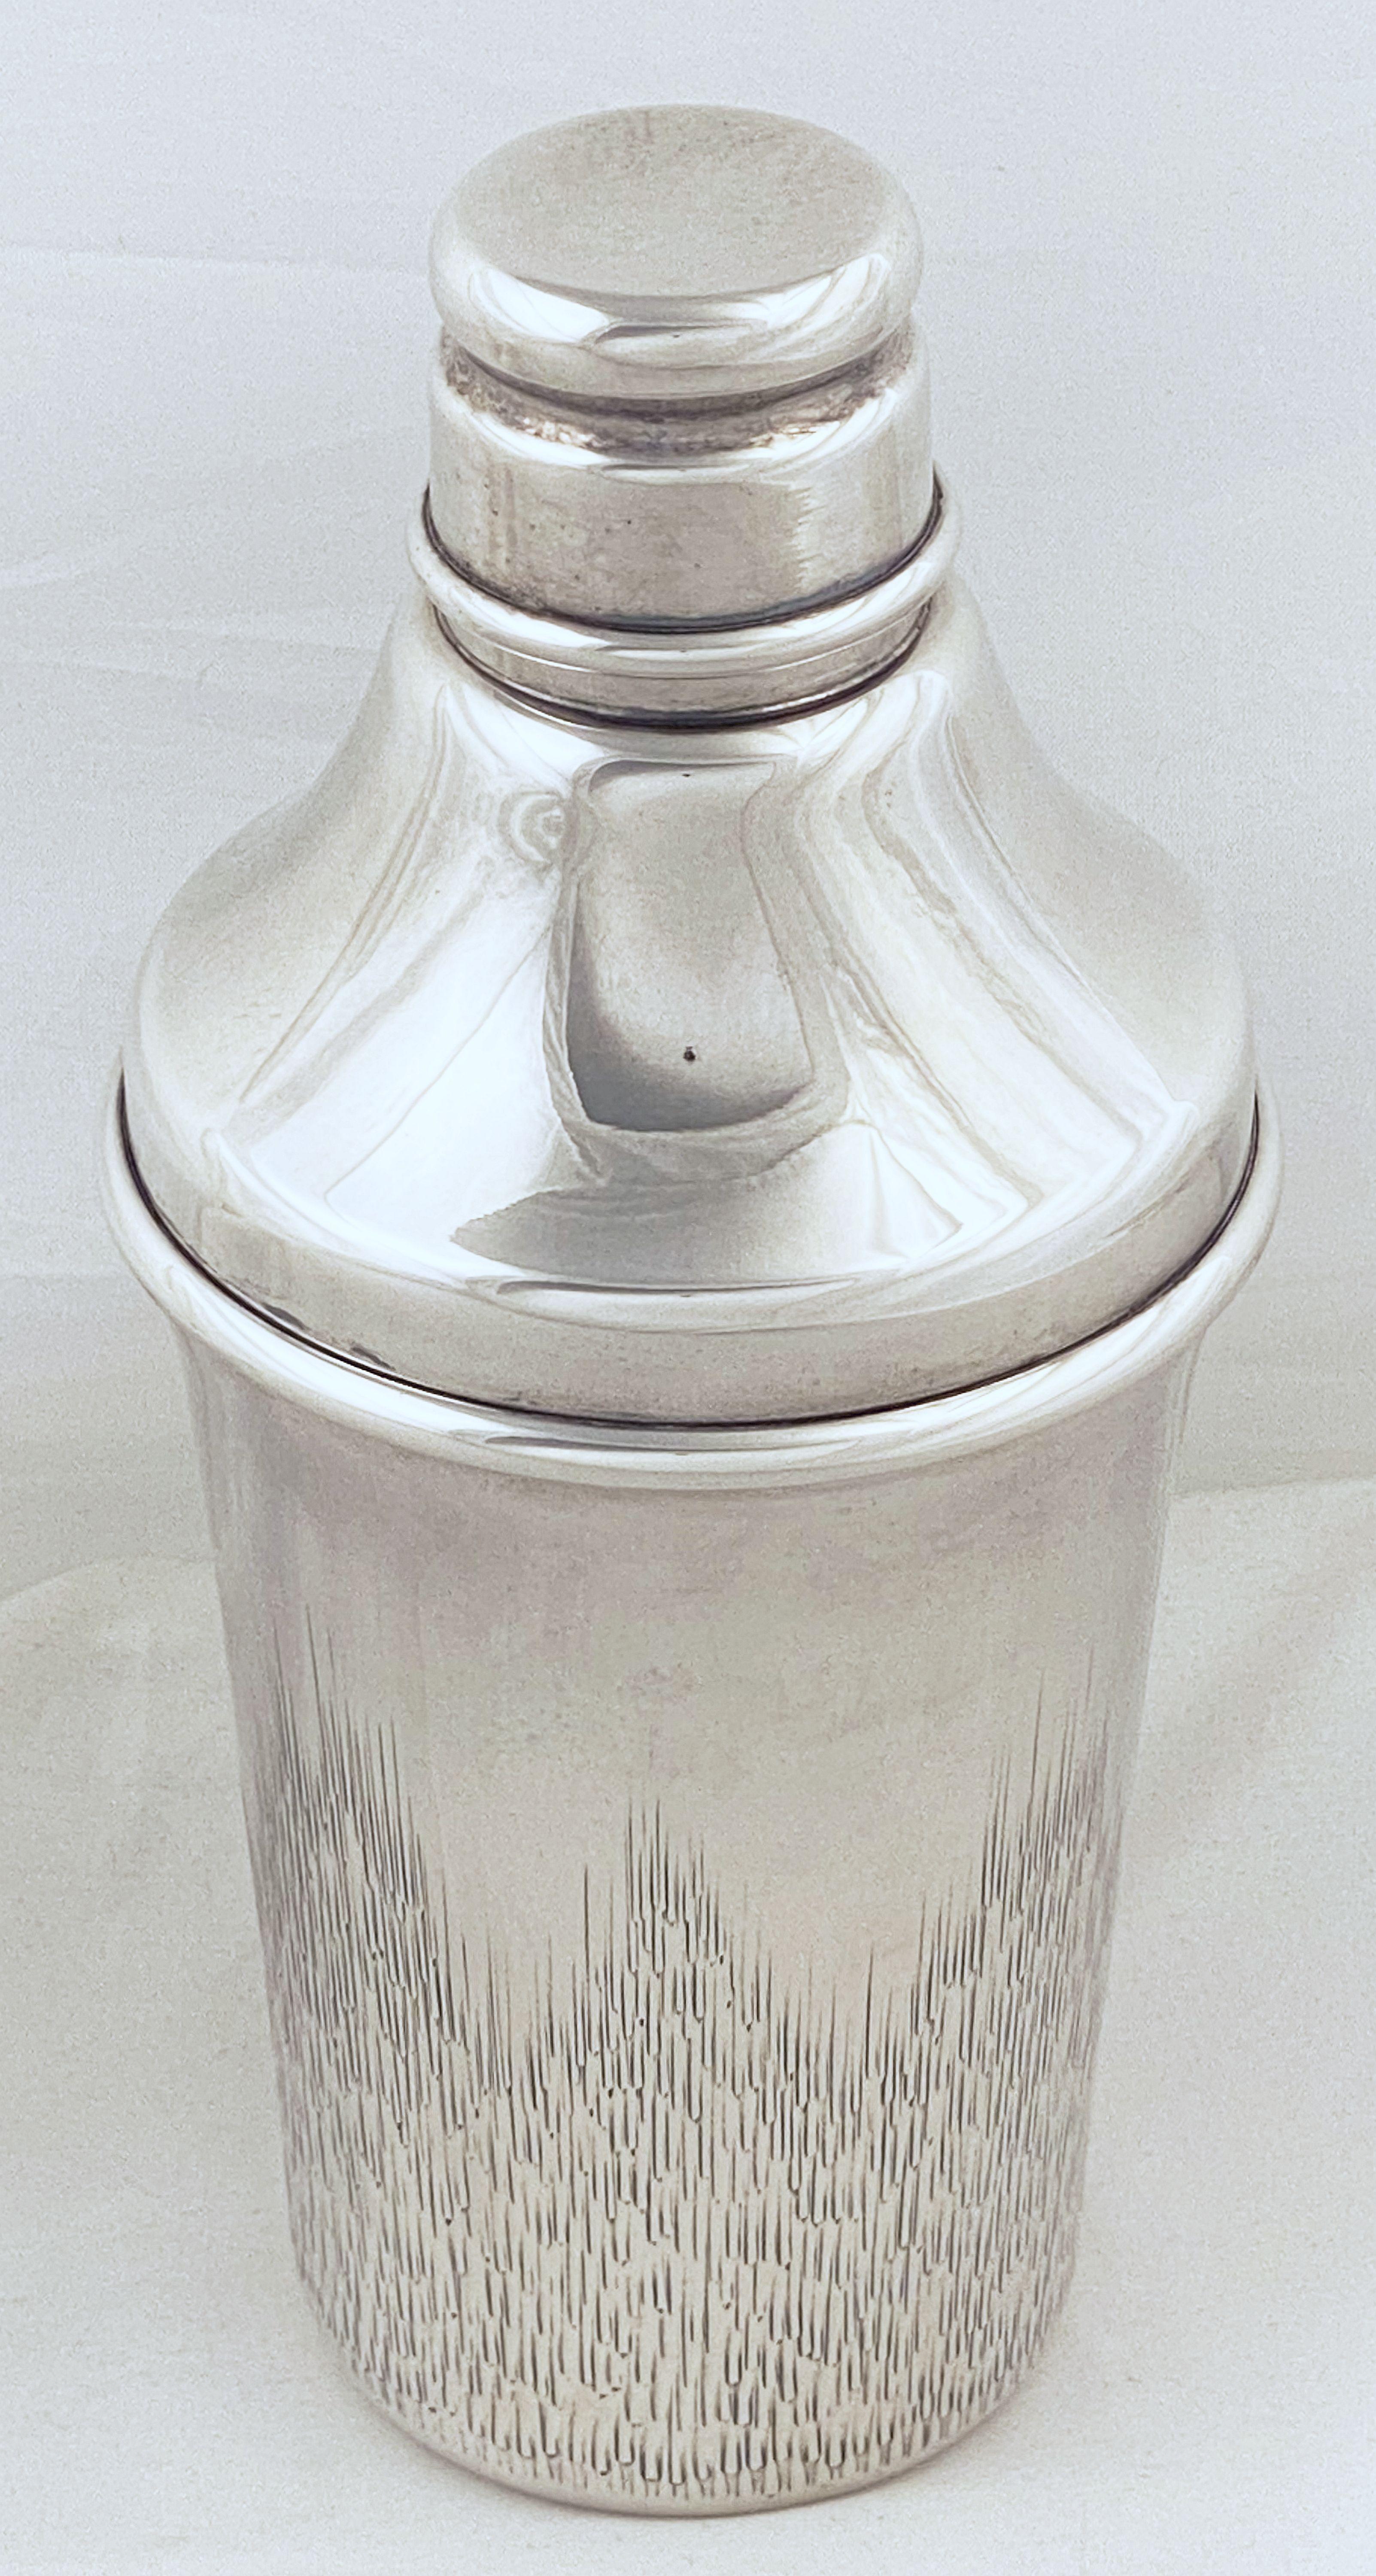 20th Century English Cocktail or Martini Shaker by Parkin Silversmiths